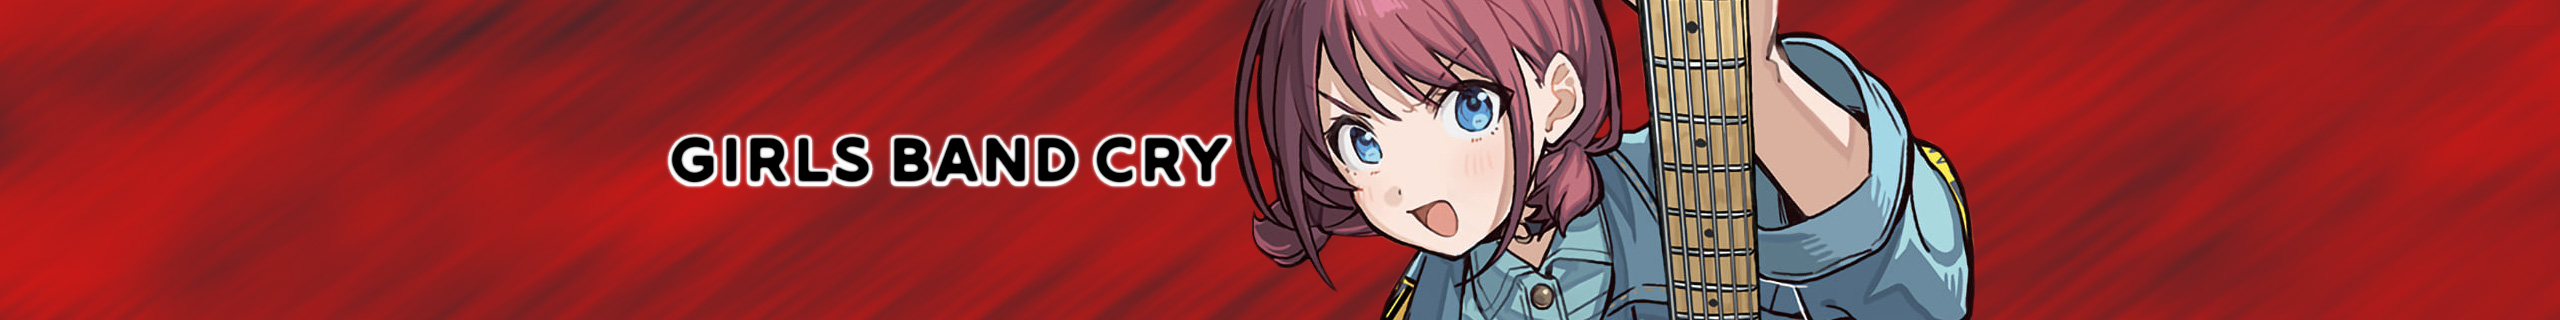 Girls Band Cry Banner